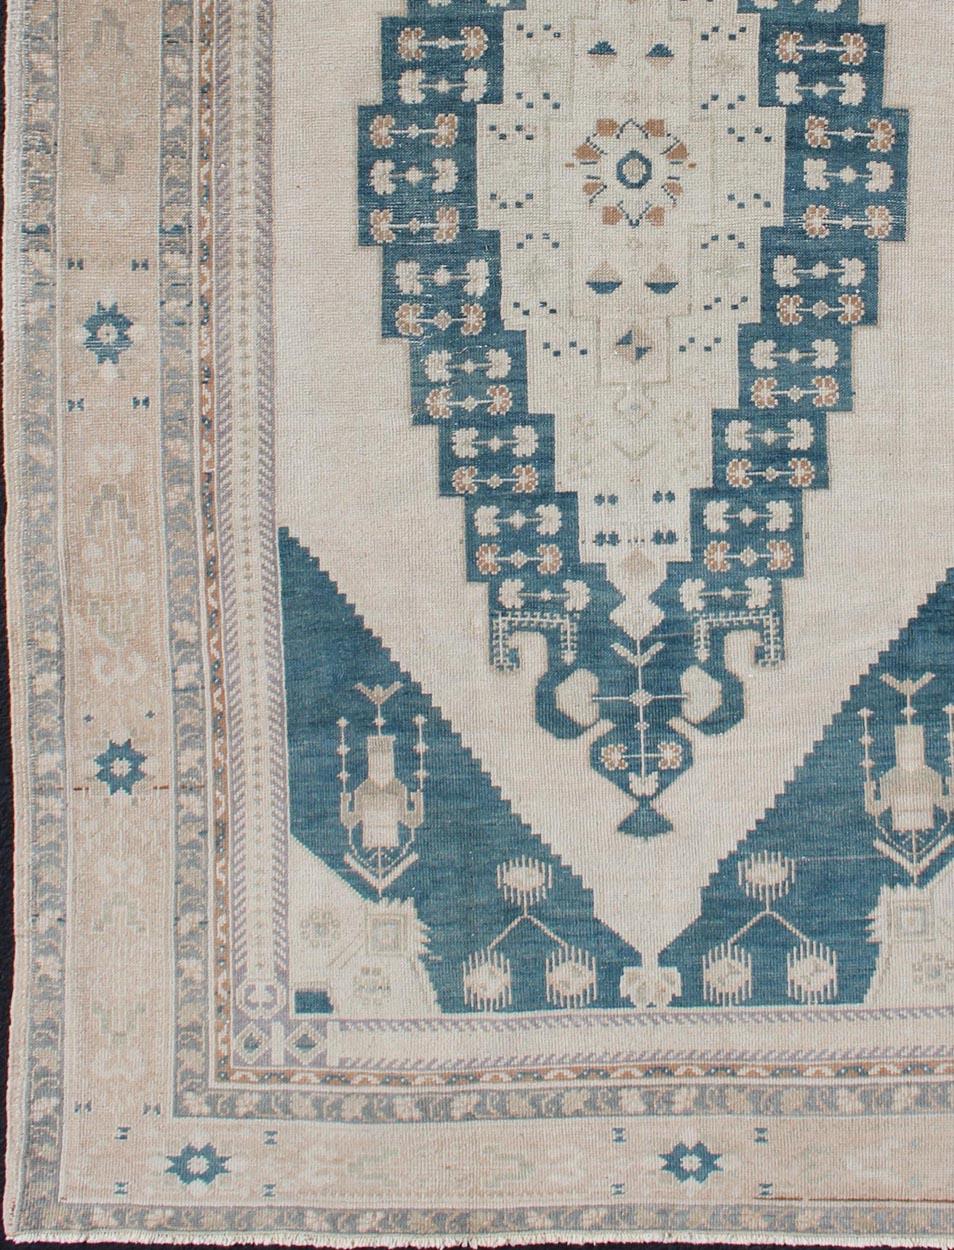 Medallion design Oushak rug from Turkey in cream and blue tones, rug TU-ALK-4895, country of origin / type: Turkey / Oushak, circa 1940

This vintage Turkish Oushak rug features a unique medallion design. The multi-banded border frames the designs